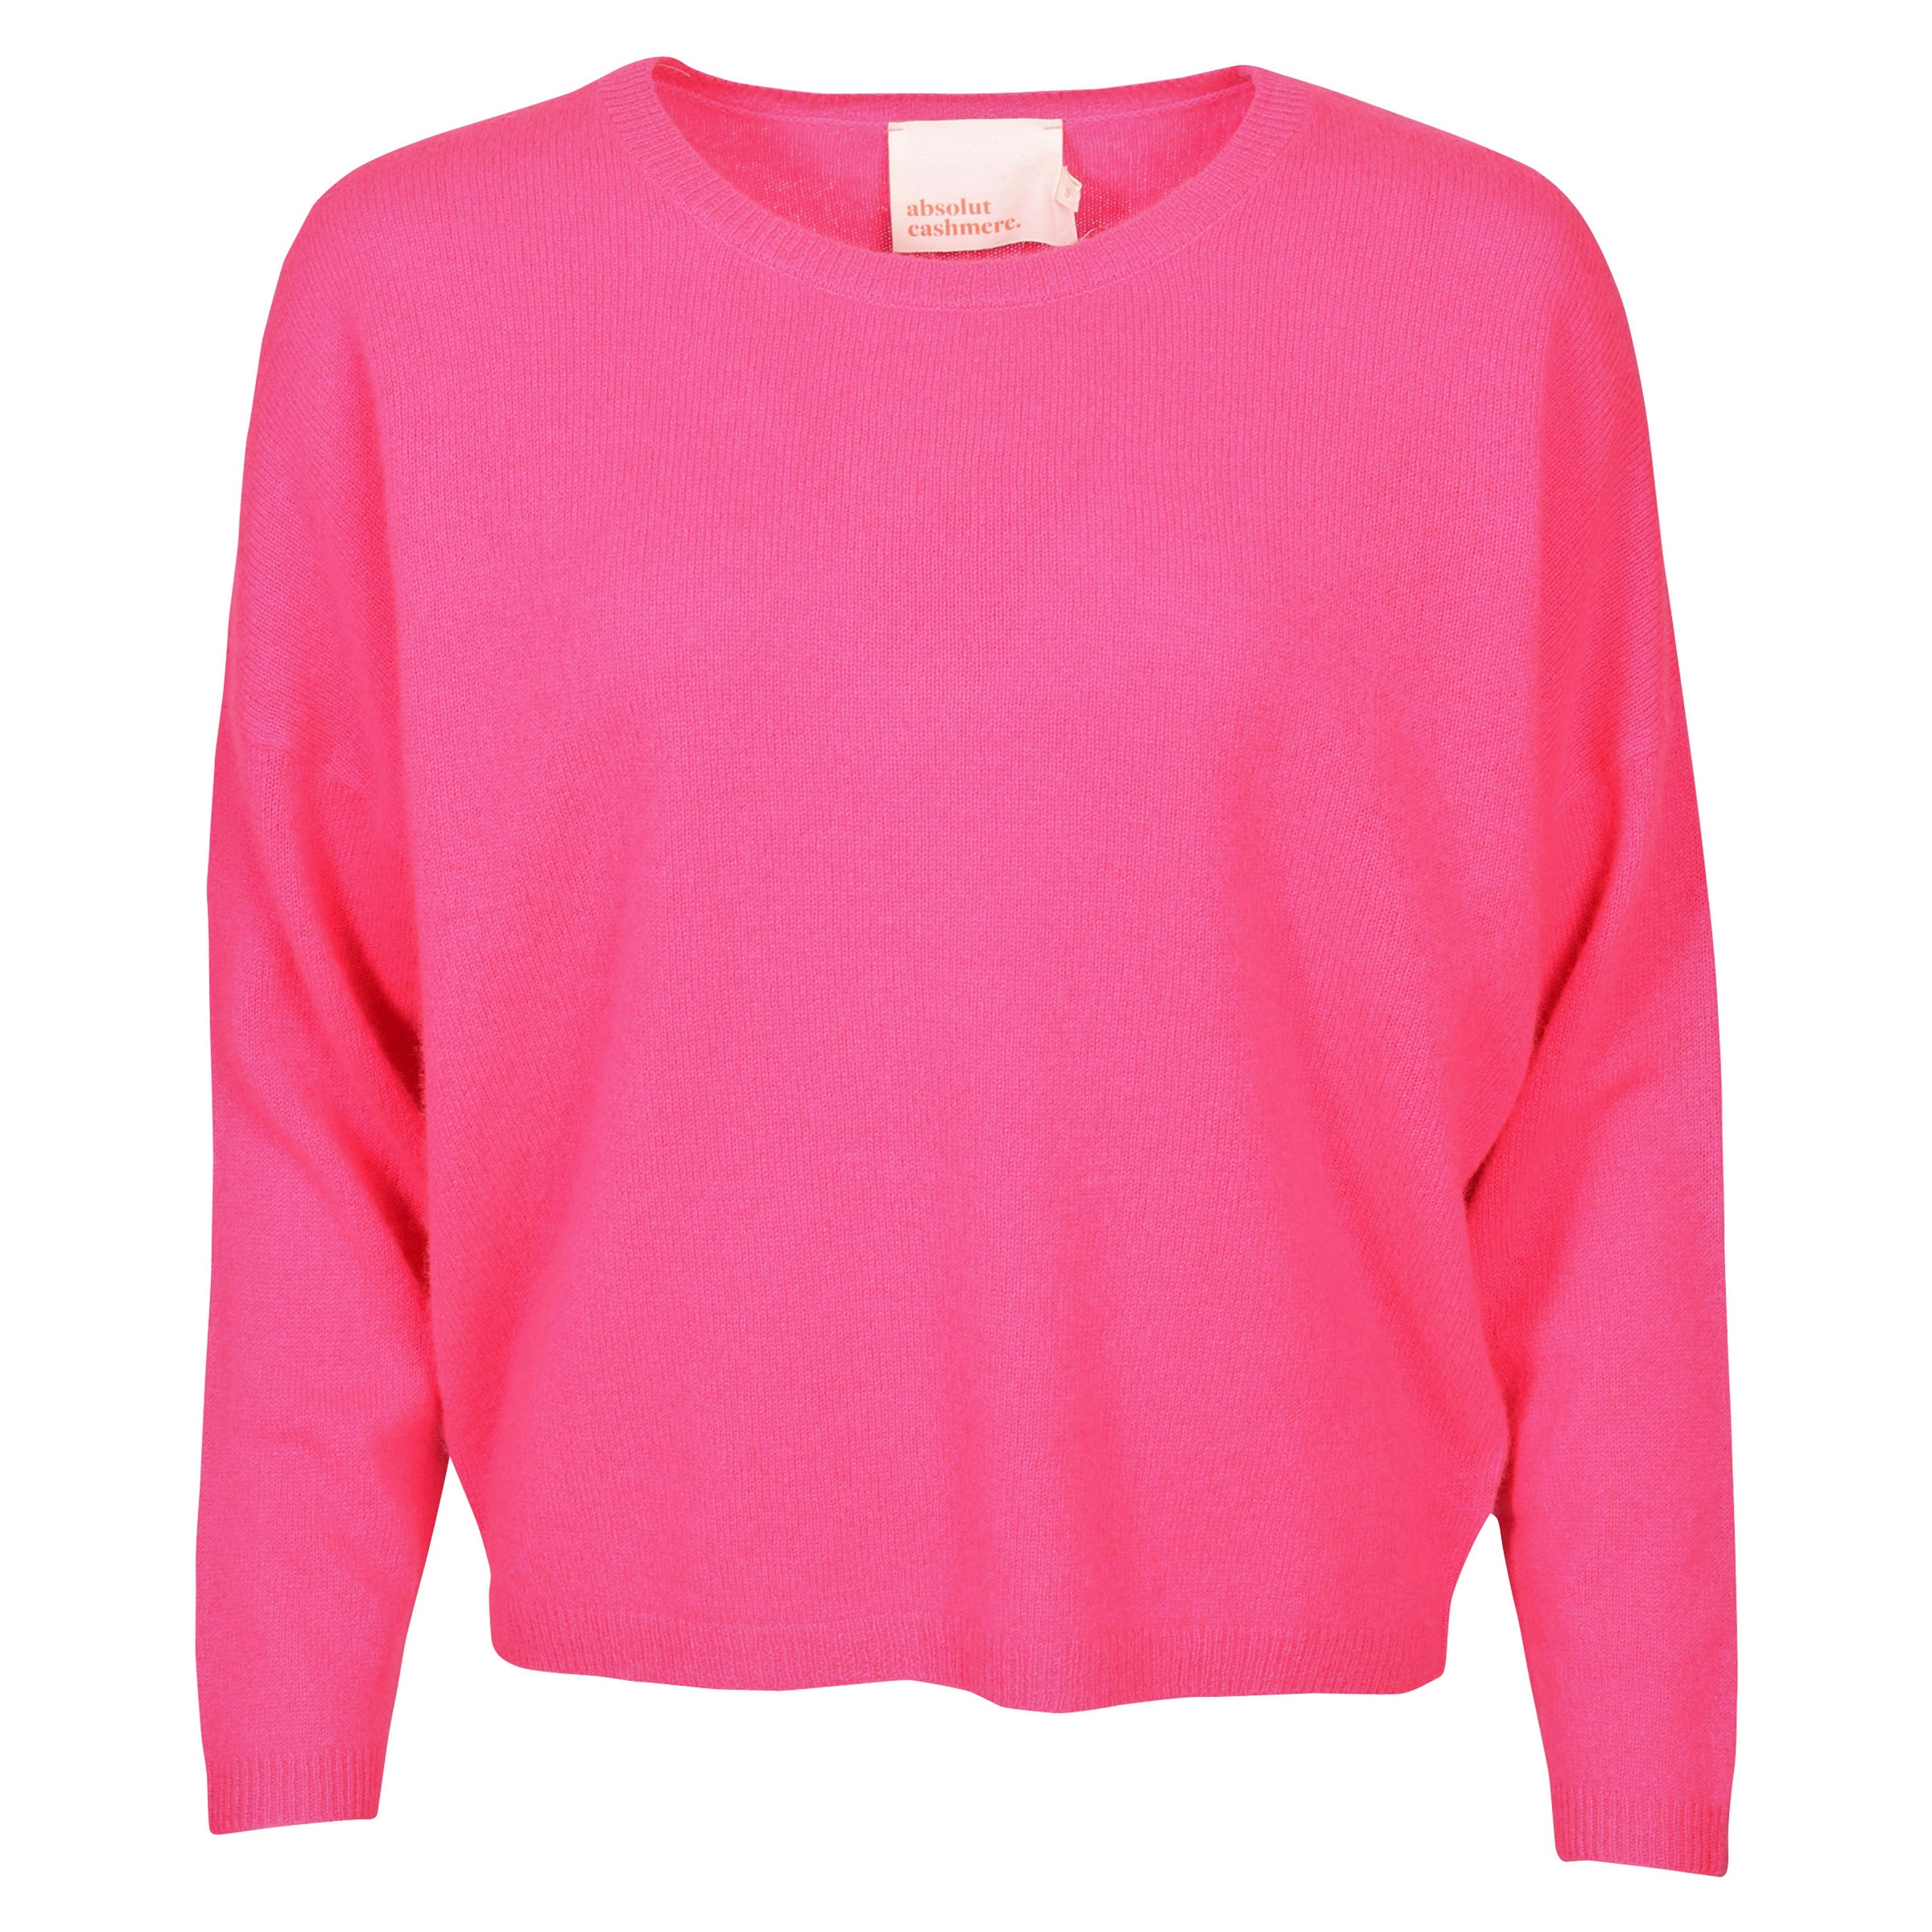 Absolut Cashmere Kaira Cashmere Pullover in Rose Fluo S